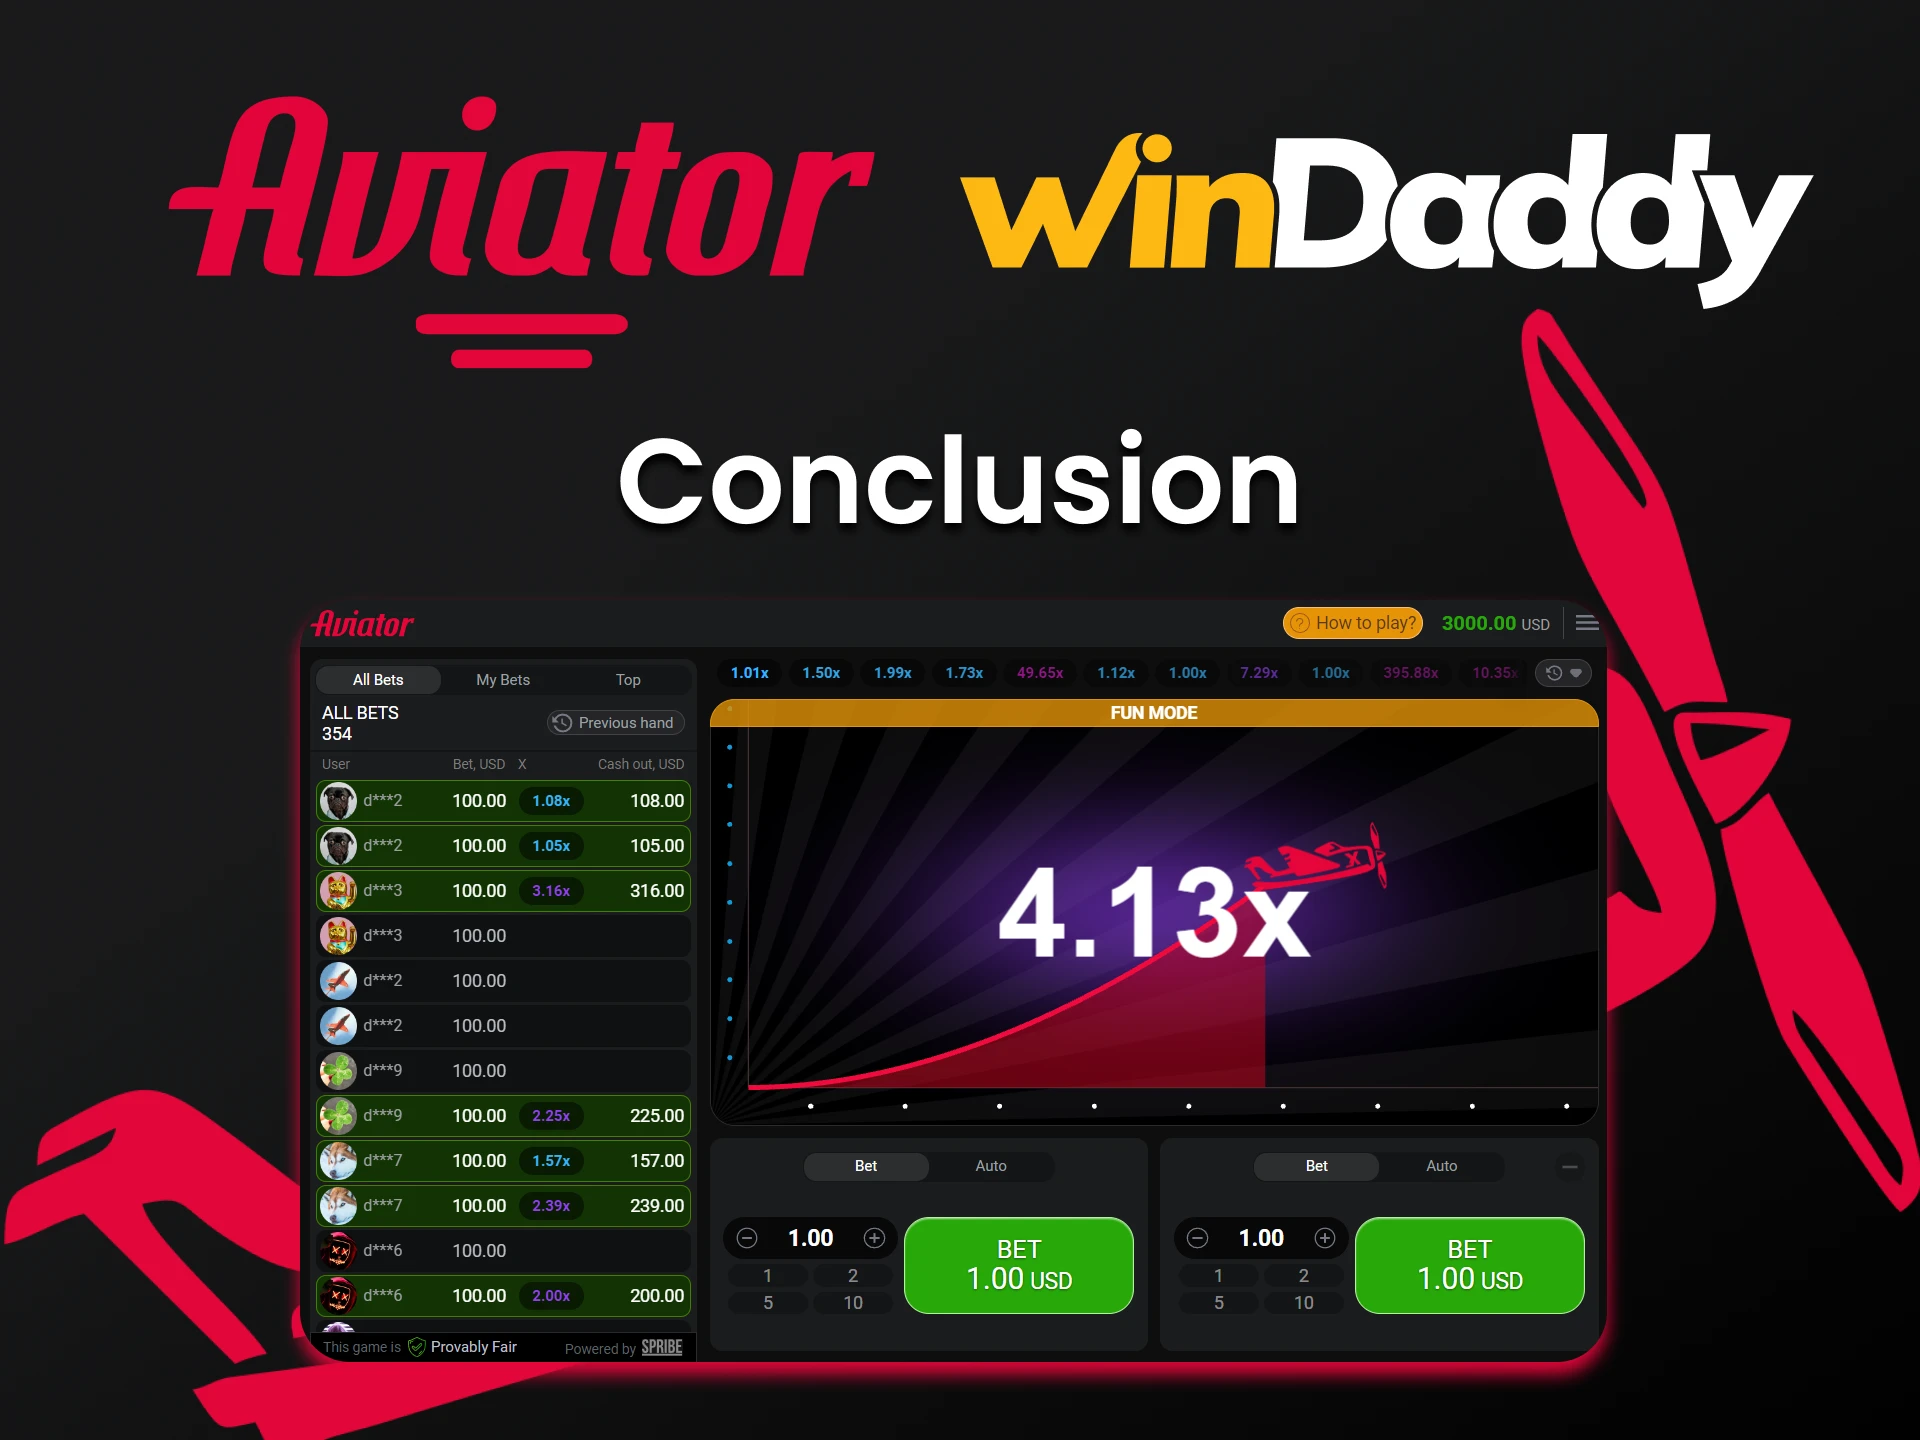 WinDaddy is the right choice for playing Aviator.